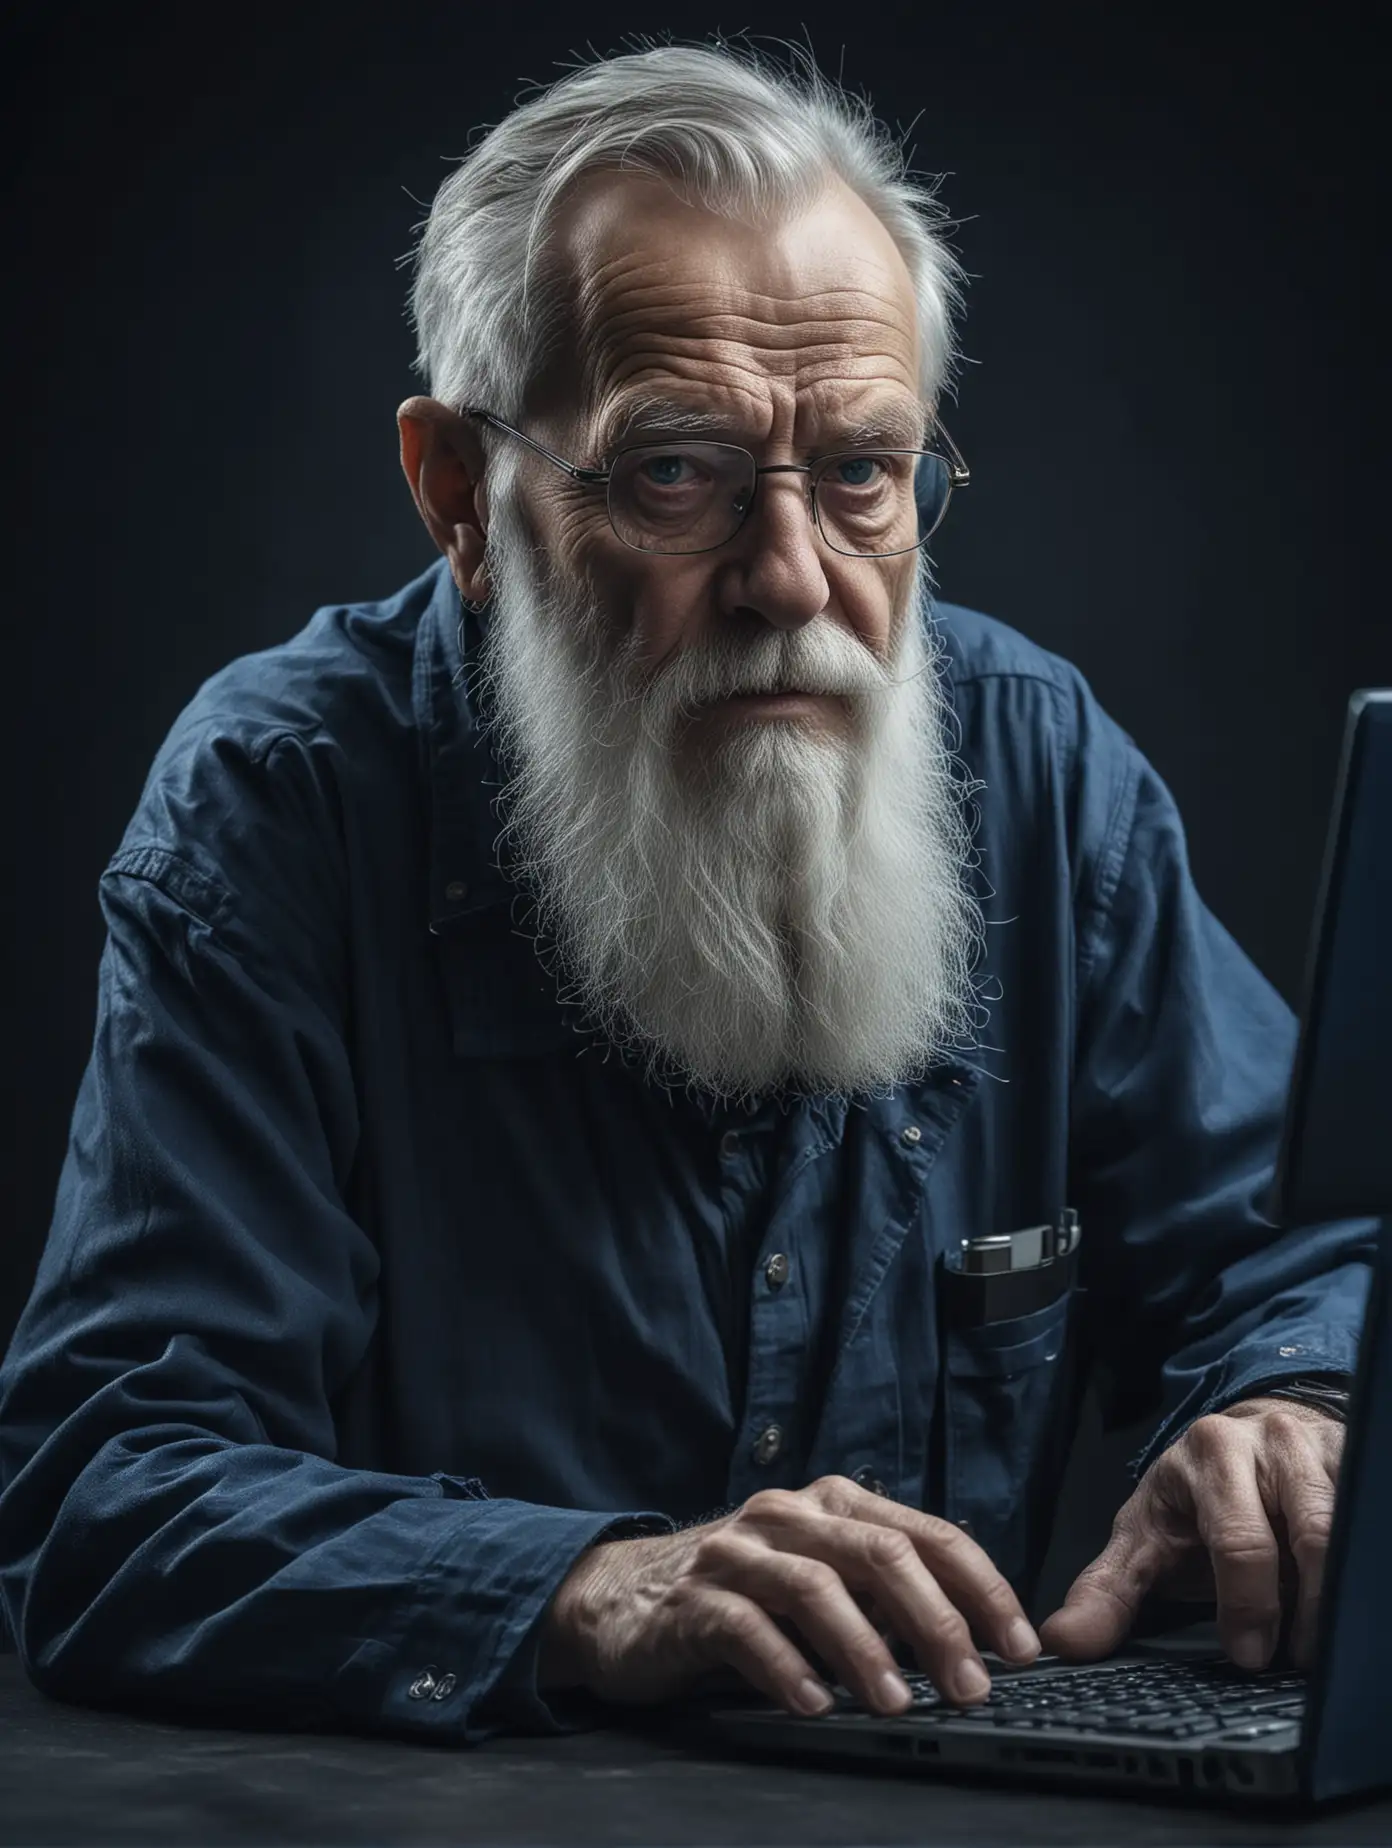 dark blue theme. Professional photo of a old man with a beard programming computer vision on a laptop
